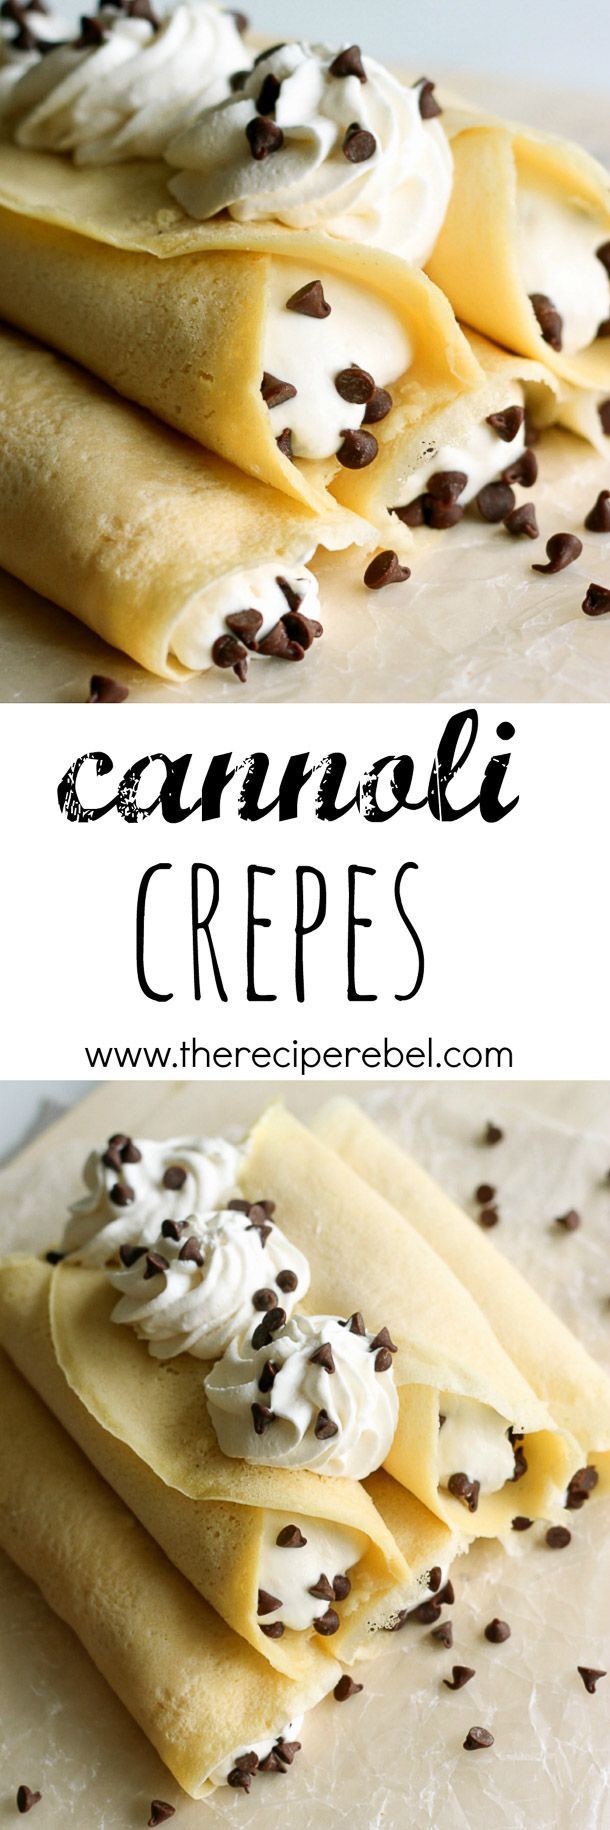 Cannoli Crepes: Soft homemade crepes filled with sweet ricotta cream and chocolate chips, topped with whipped cream and more